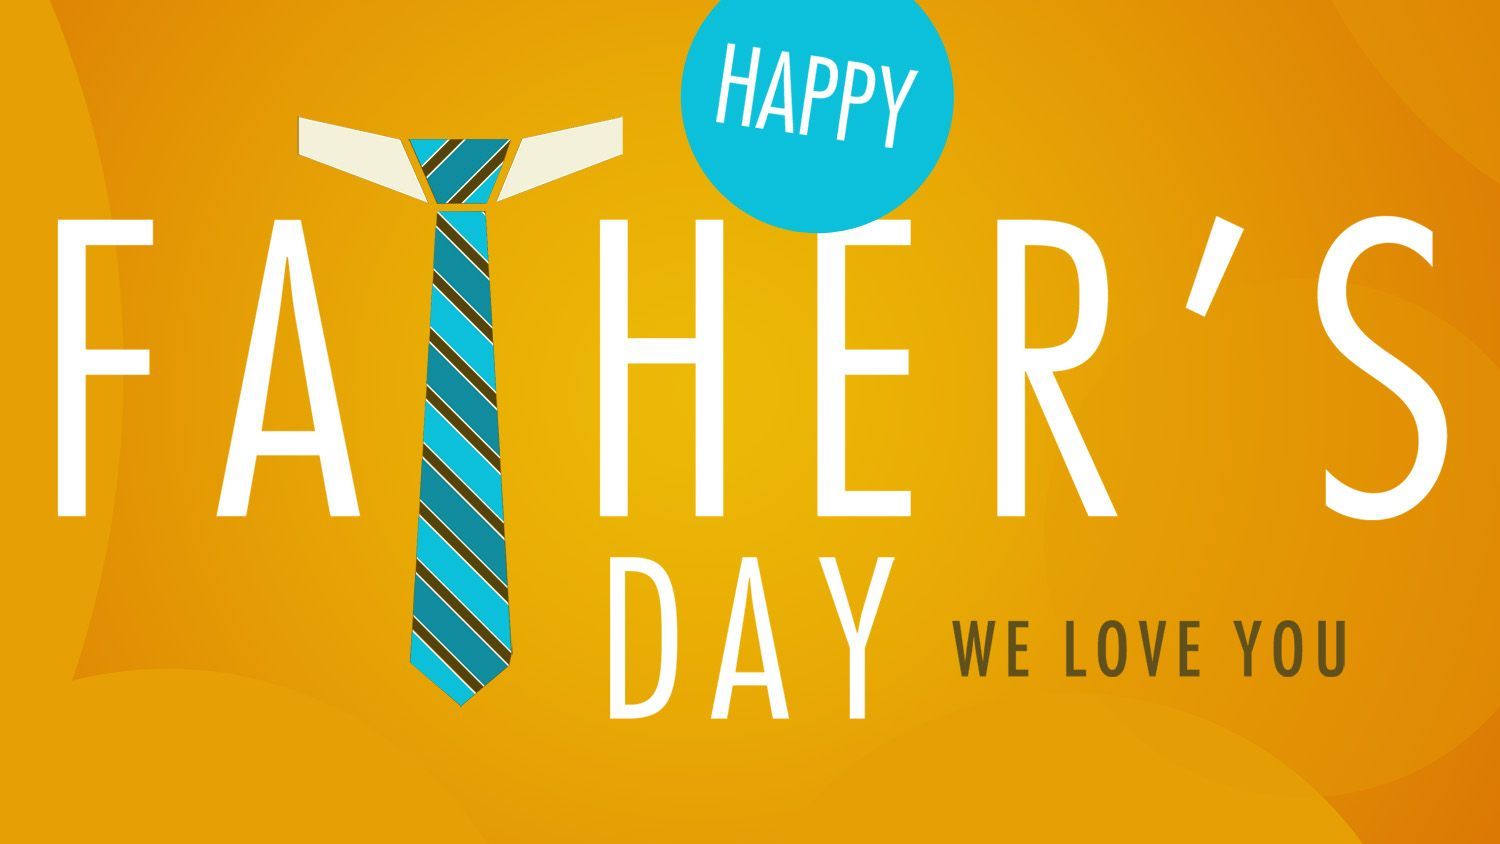 Happy Fathers Day 2020 HD Wallpaper Image Free Download